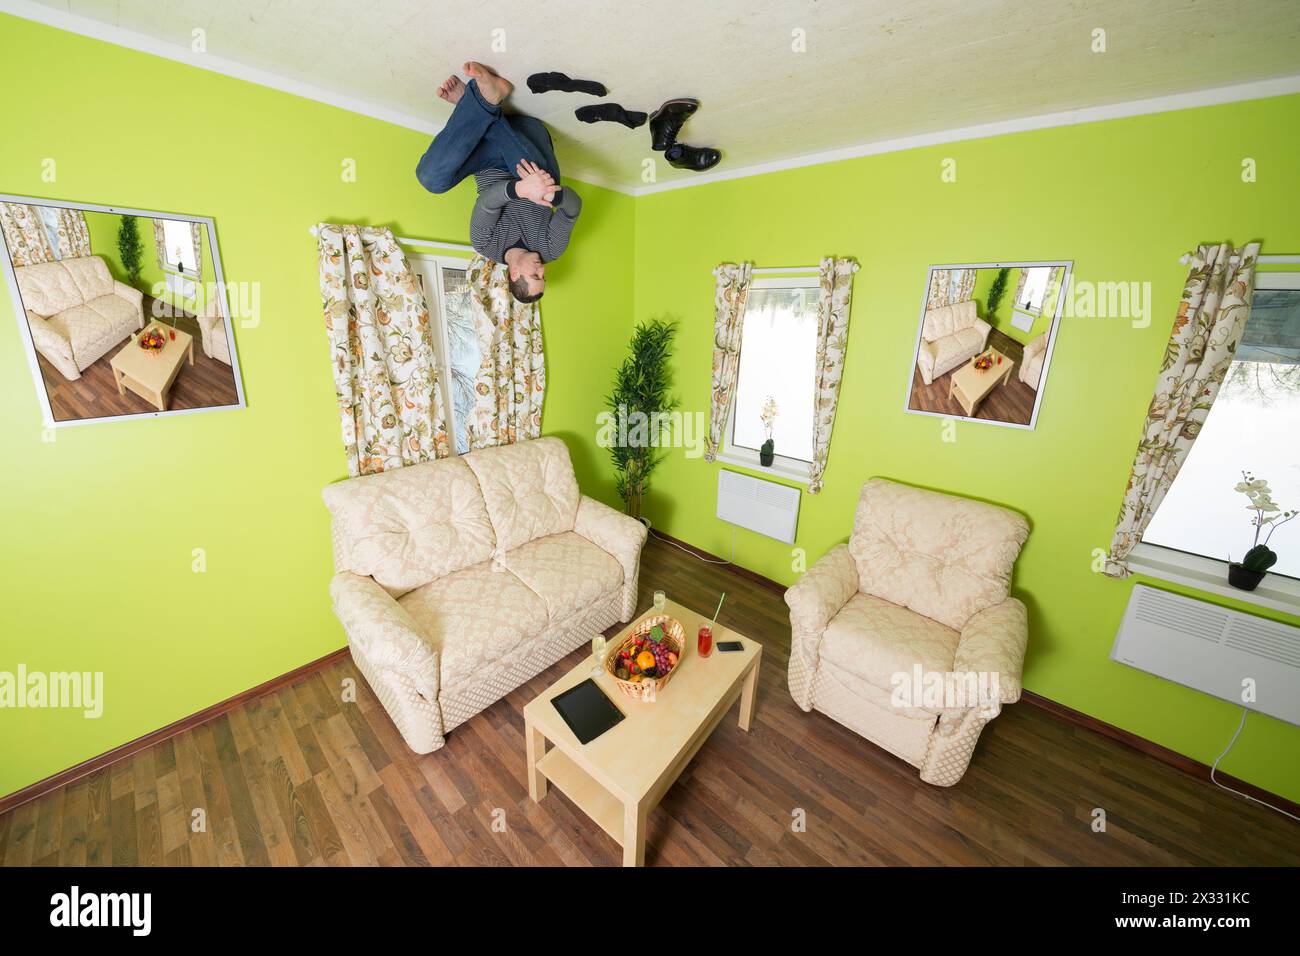 Man in jeans sitting on the ceiling without shoes and socks Stock Photo